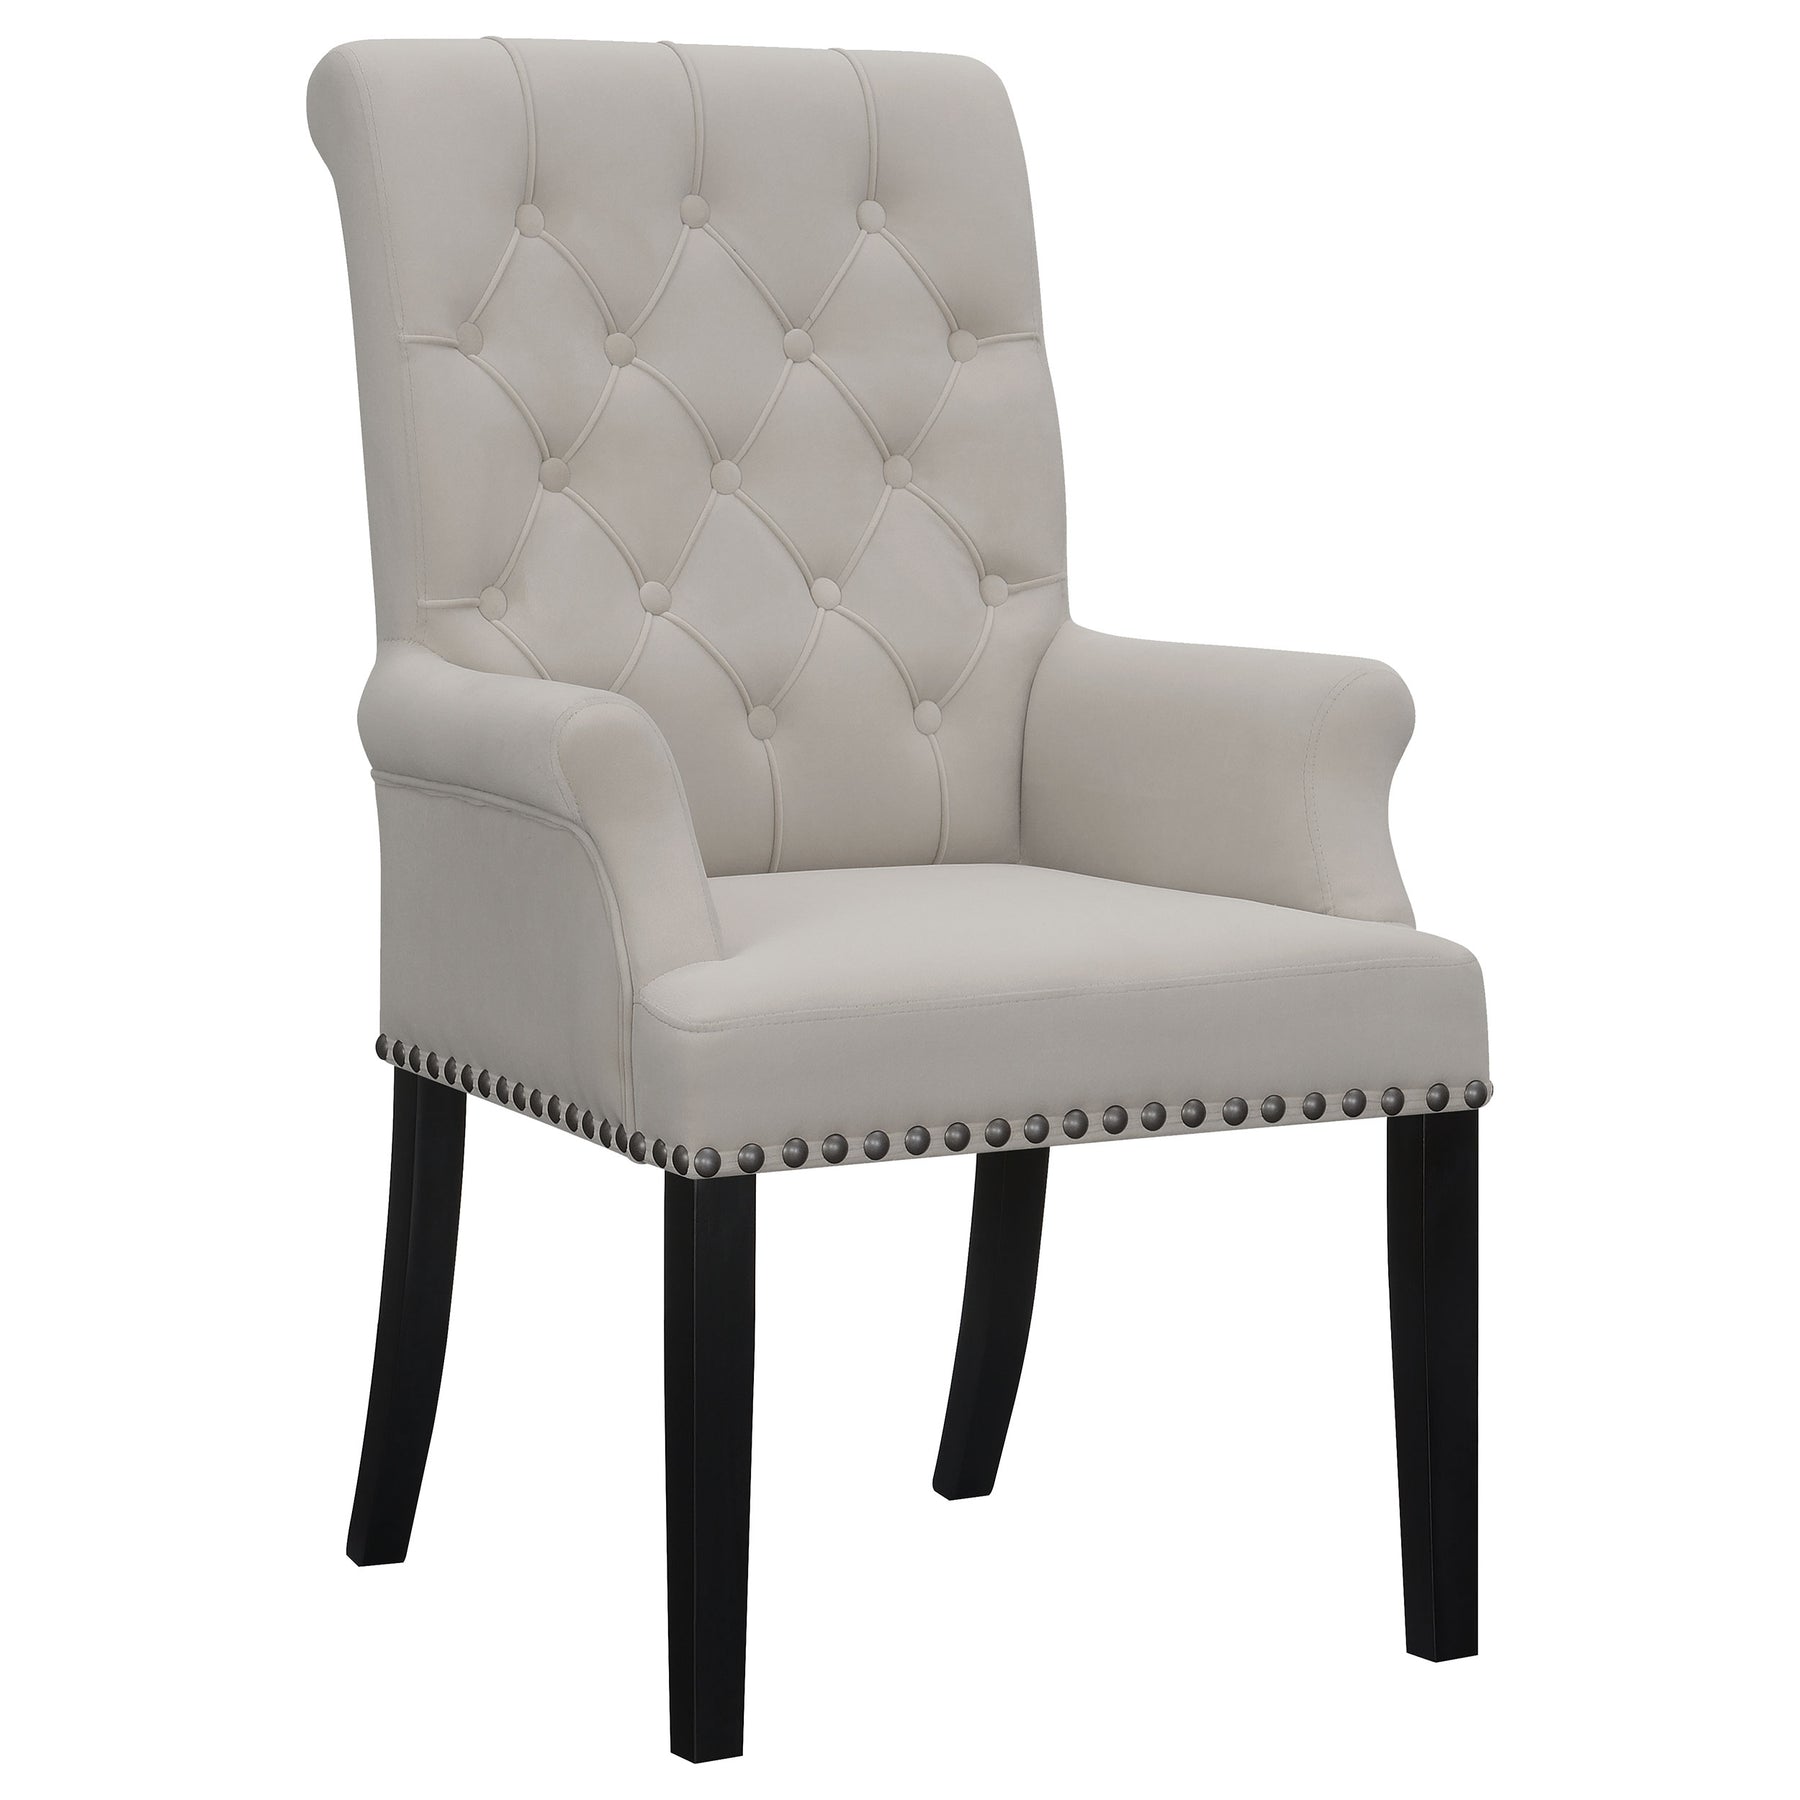 Alana Upholstered Tufted Arm Chair with Nailhead Trim Alana Upholstered Tufted Arm Chair with Nailhead Trim Half Price Furniture